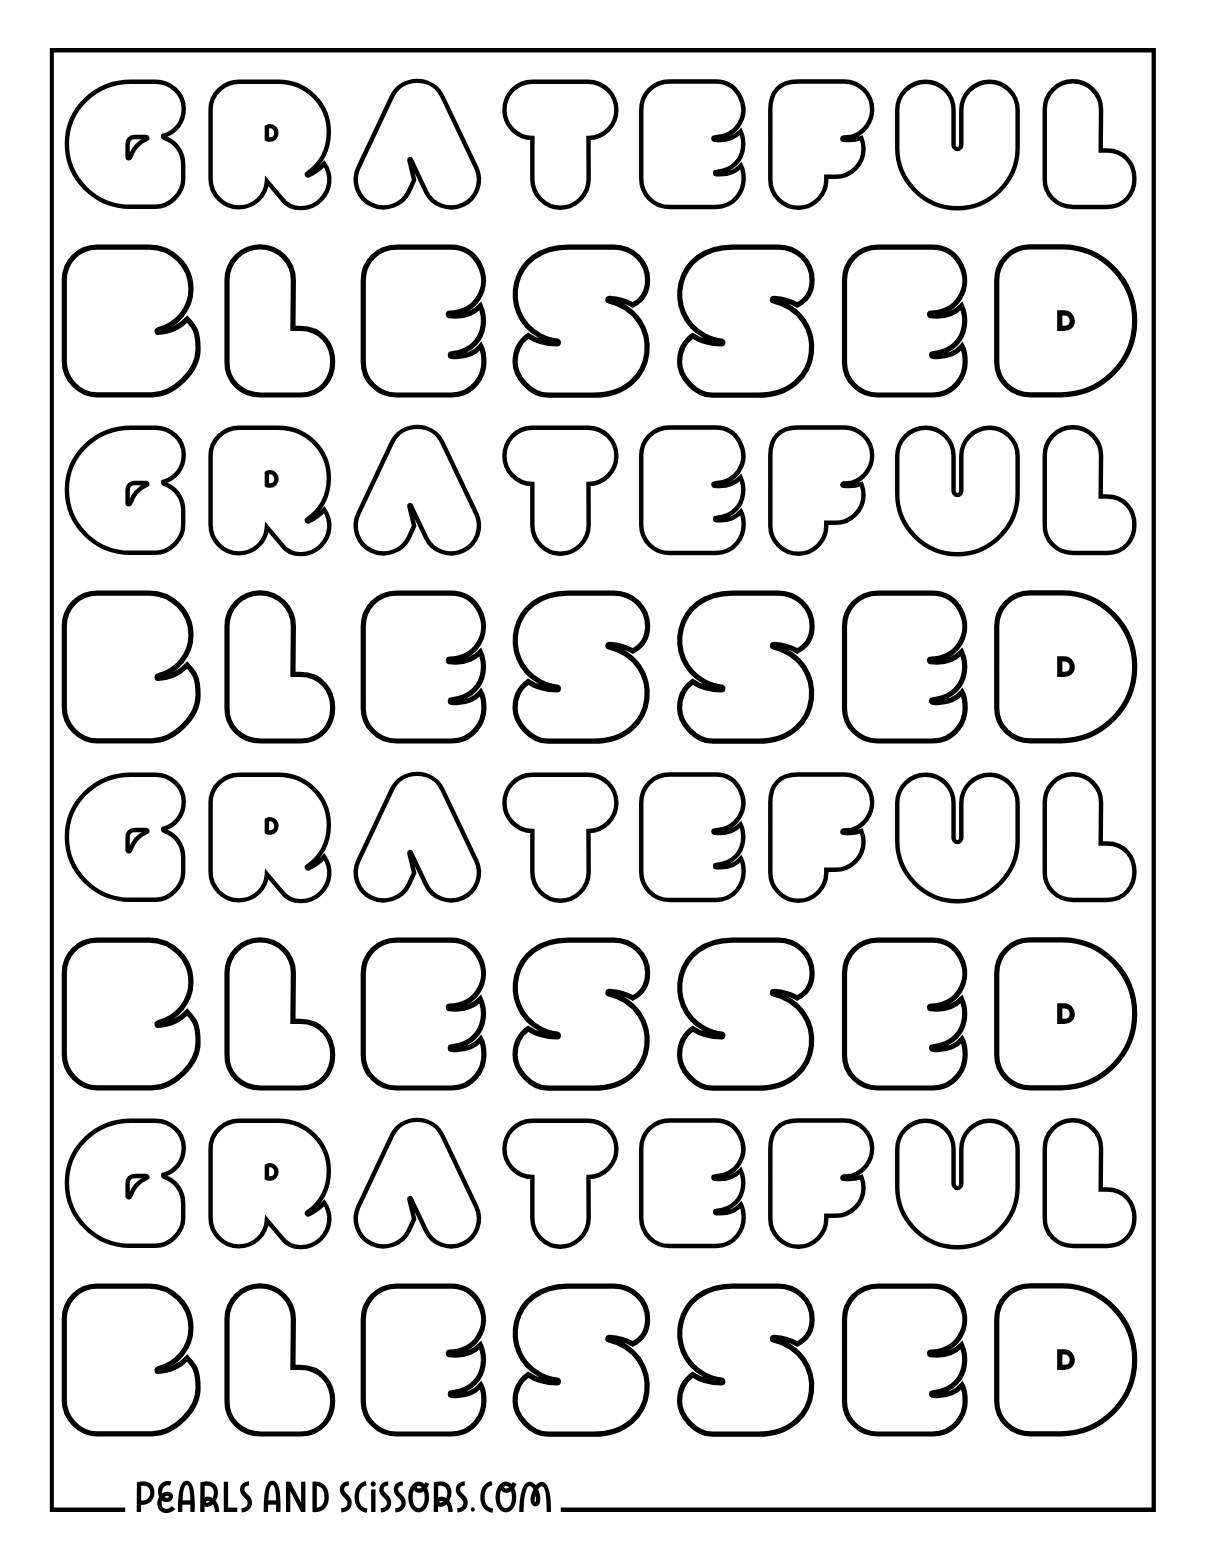 Blessed and grateful thanksgiving printables to color.